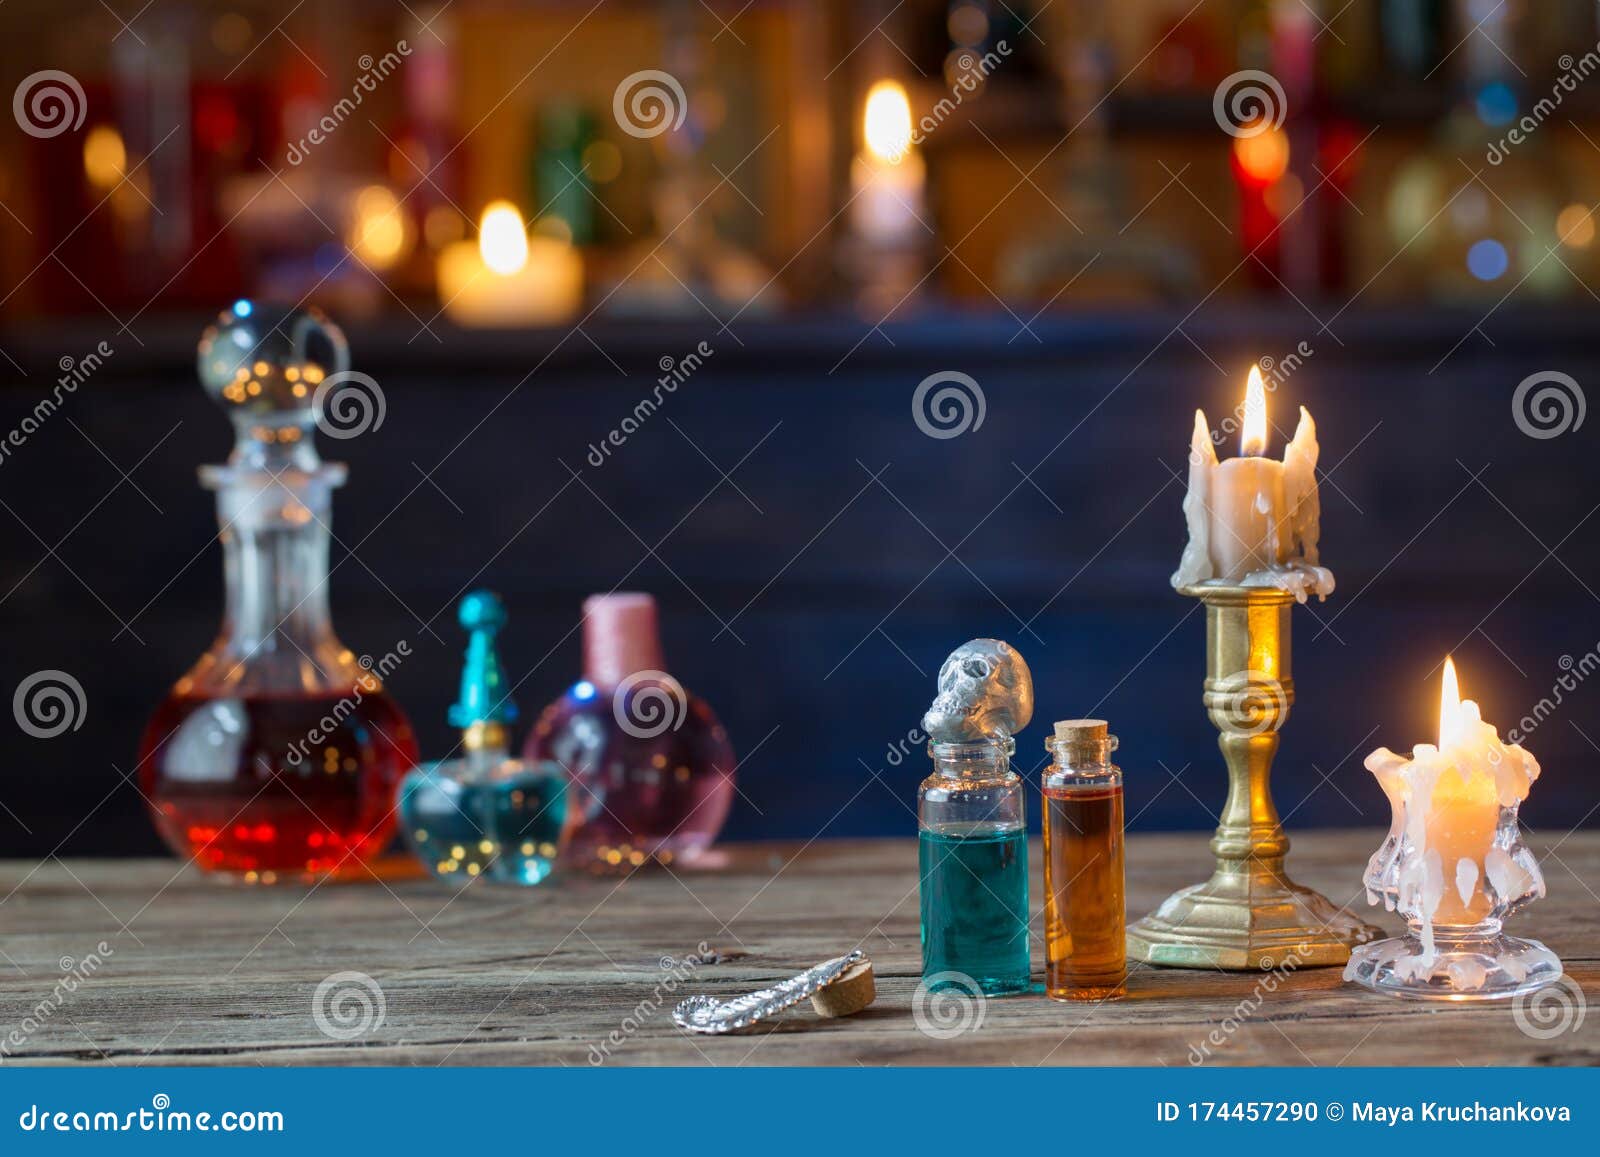 Magic Potions in Bottles on Wooden Table Stock Photo - Image of bottles